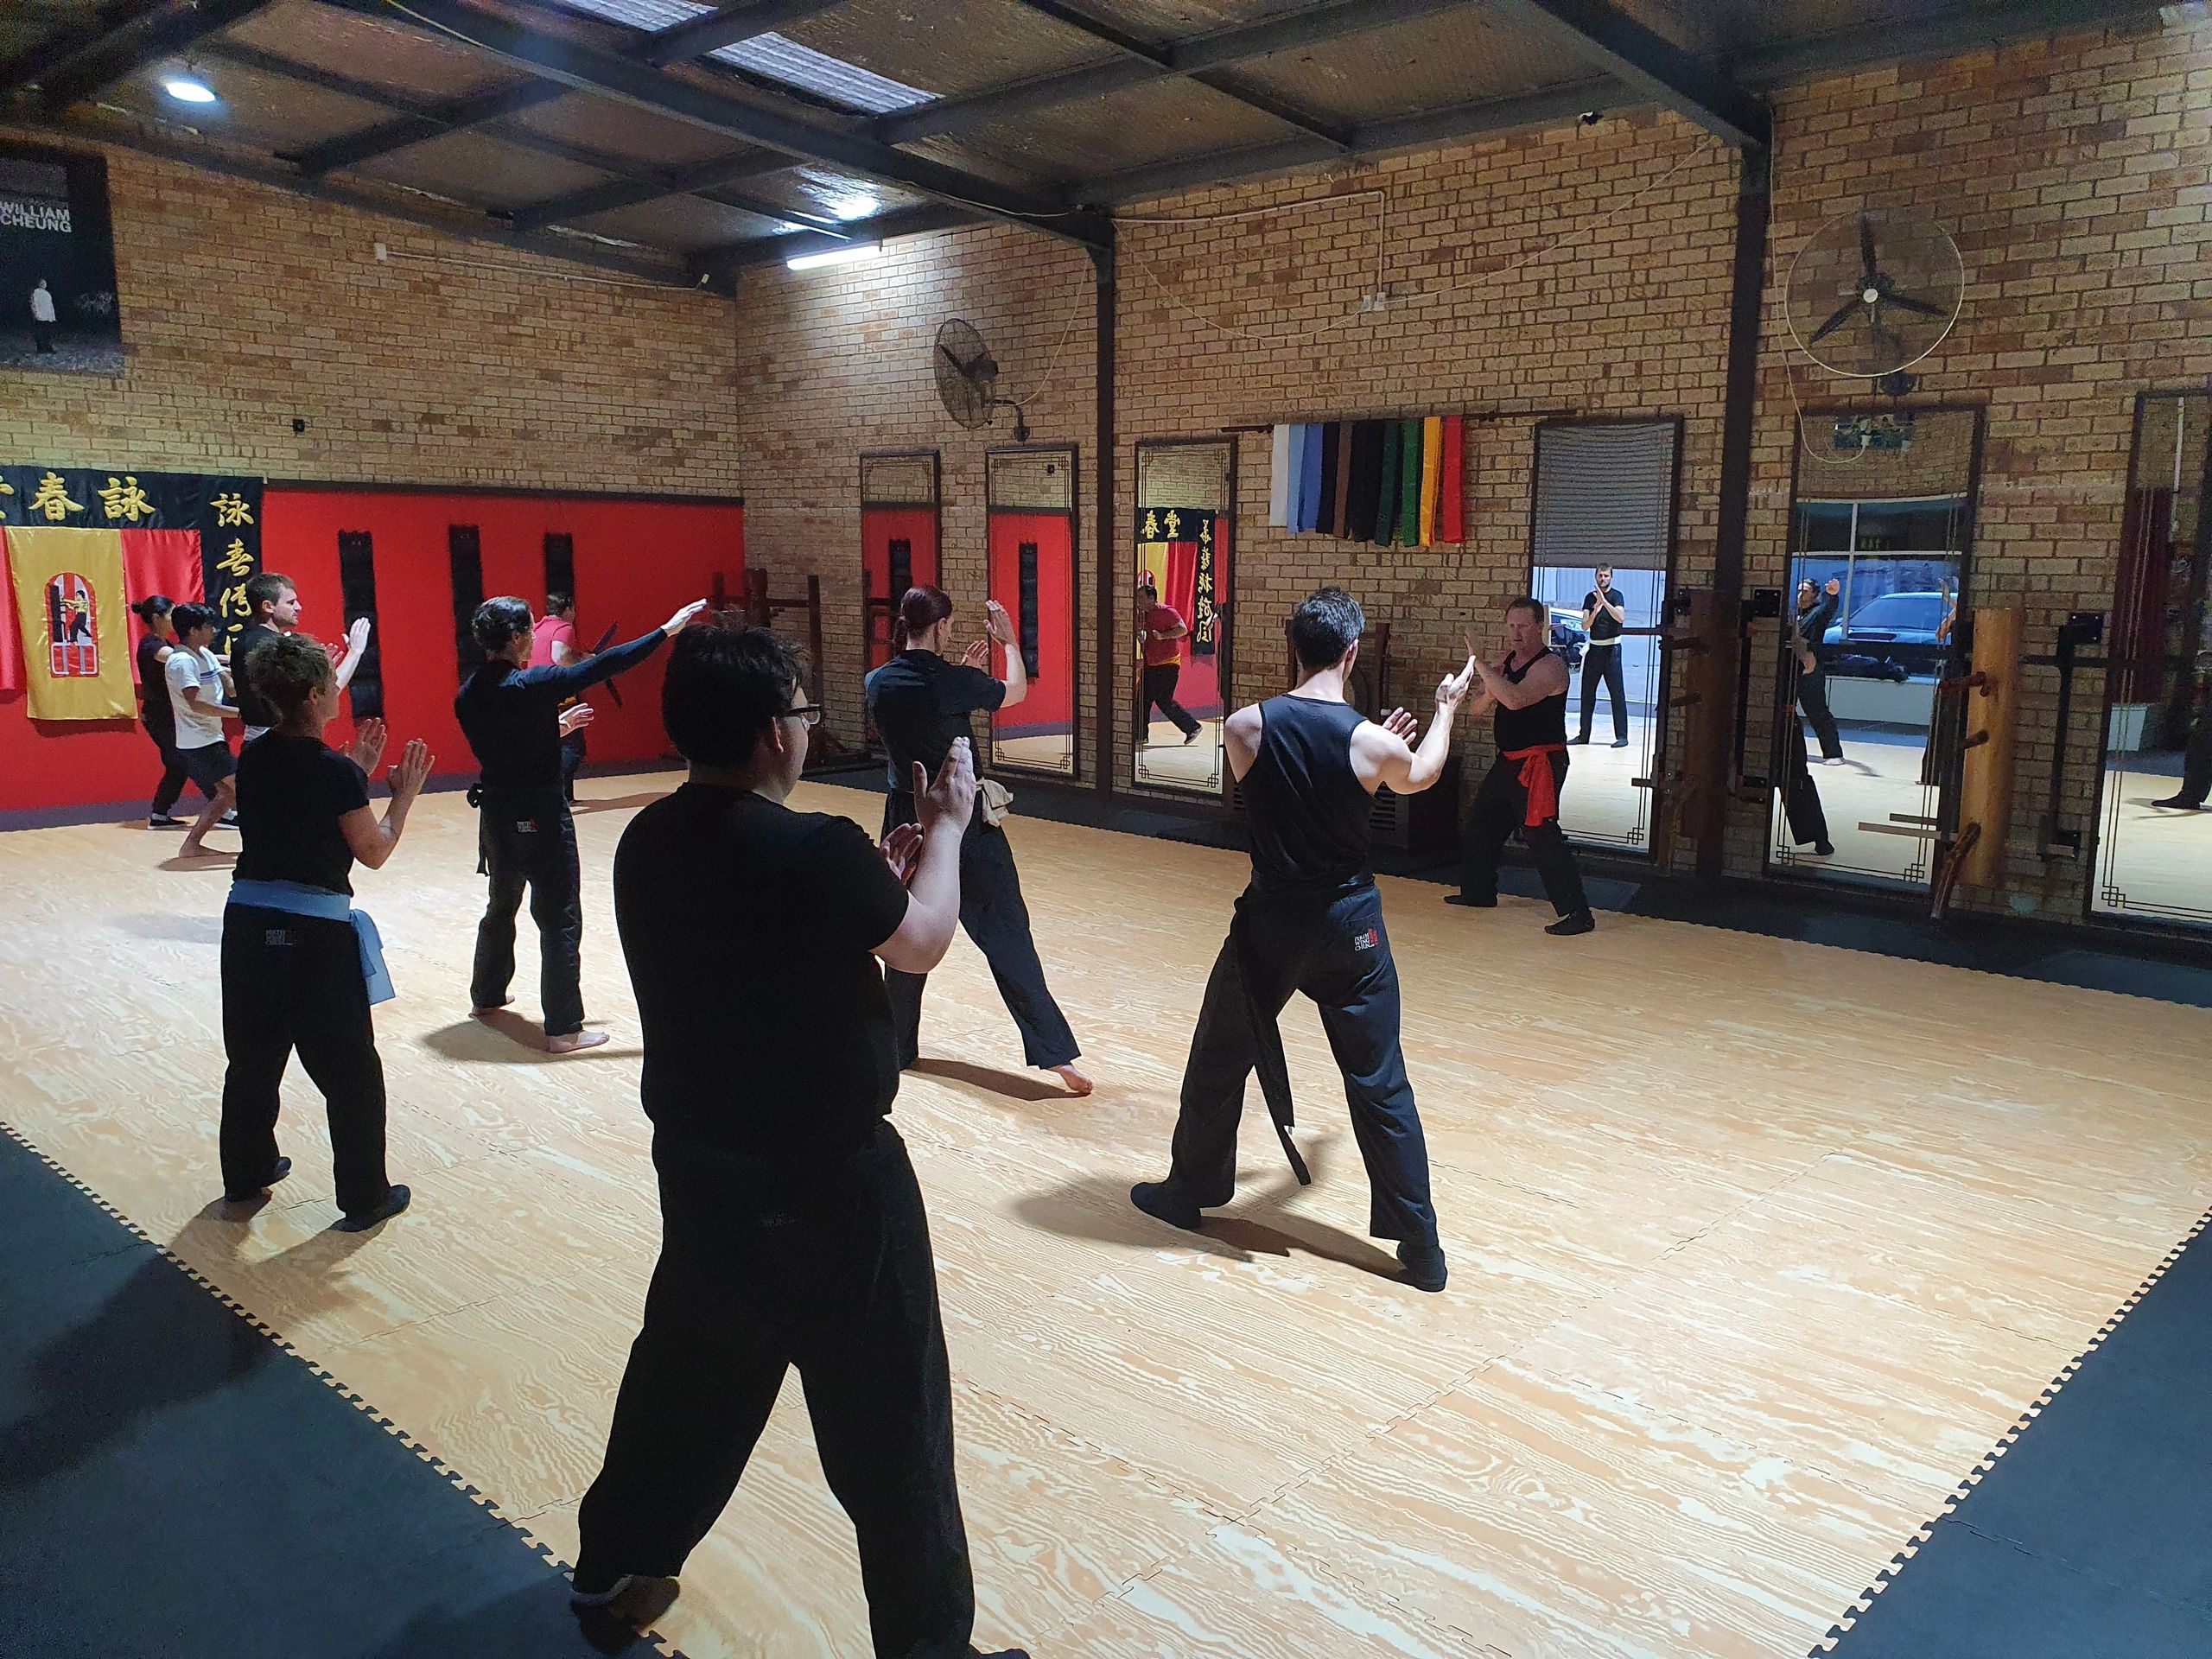 Perth Wing Chun class in action